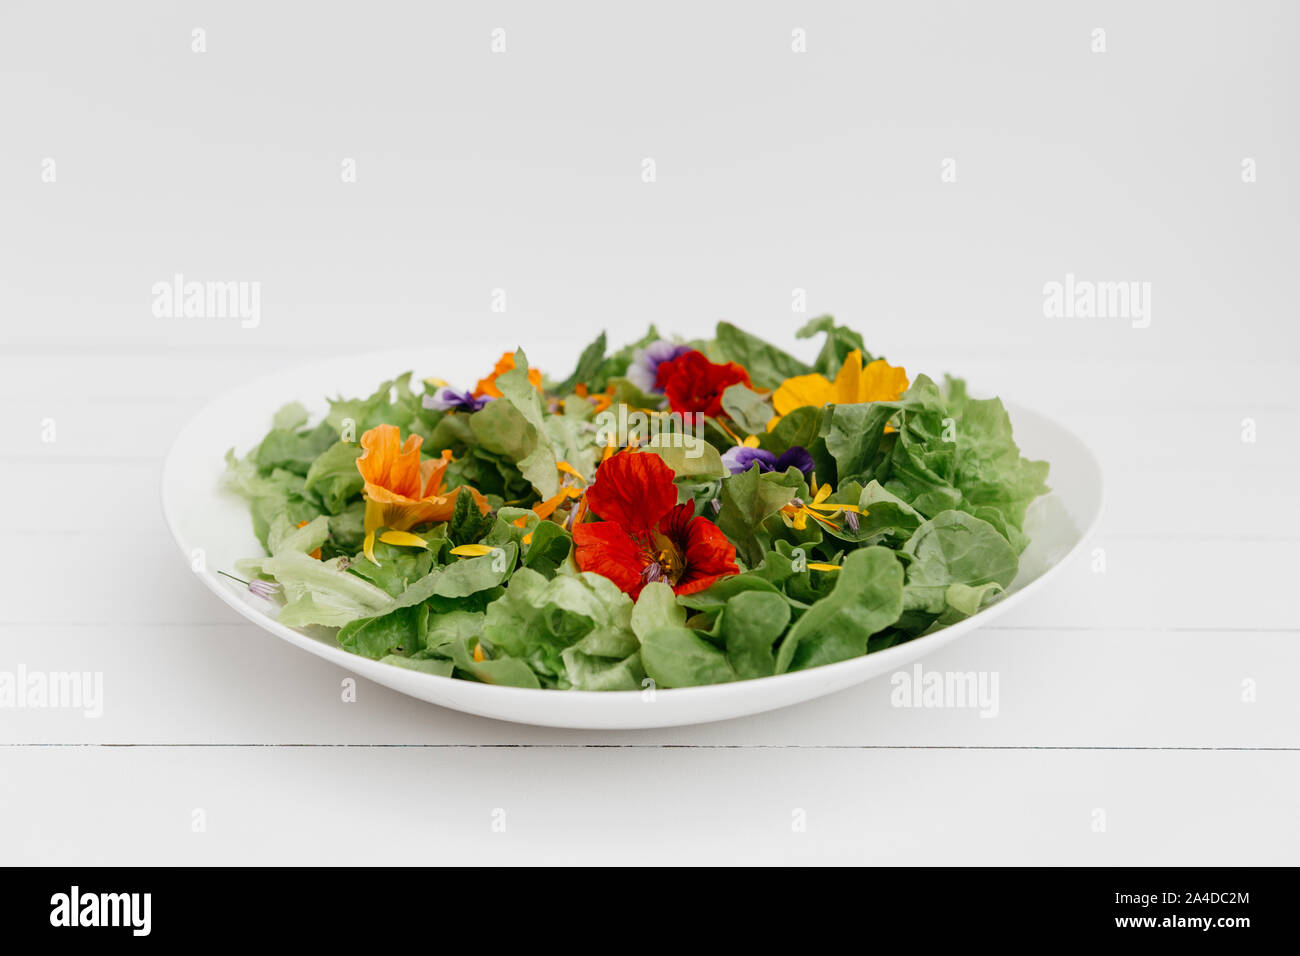 Plate of Green salad with edible flowers Stock Photo